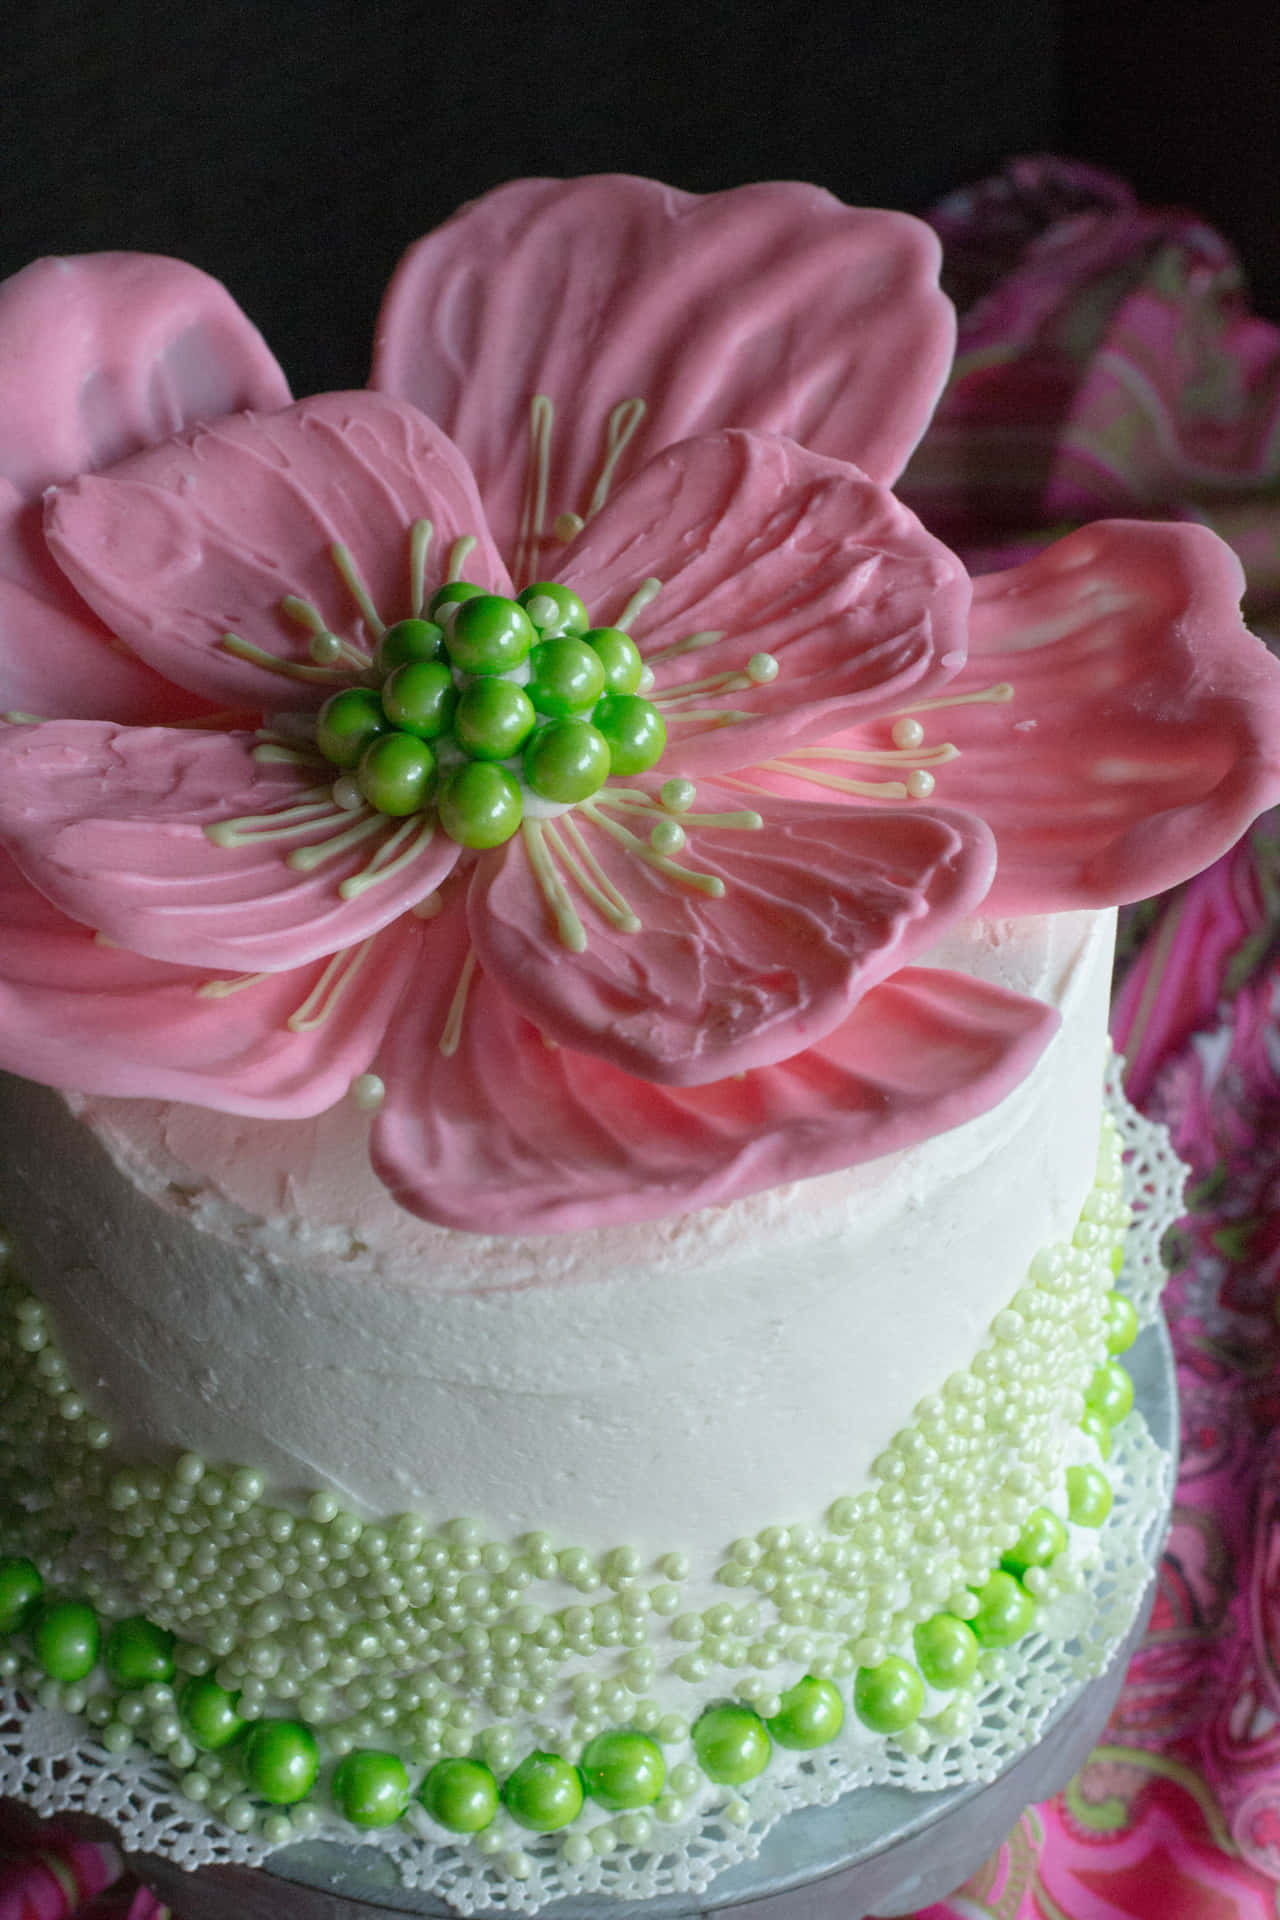 A Stunning Floral Cake for a Special Occasion Wallpaper